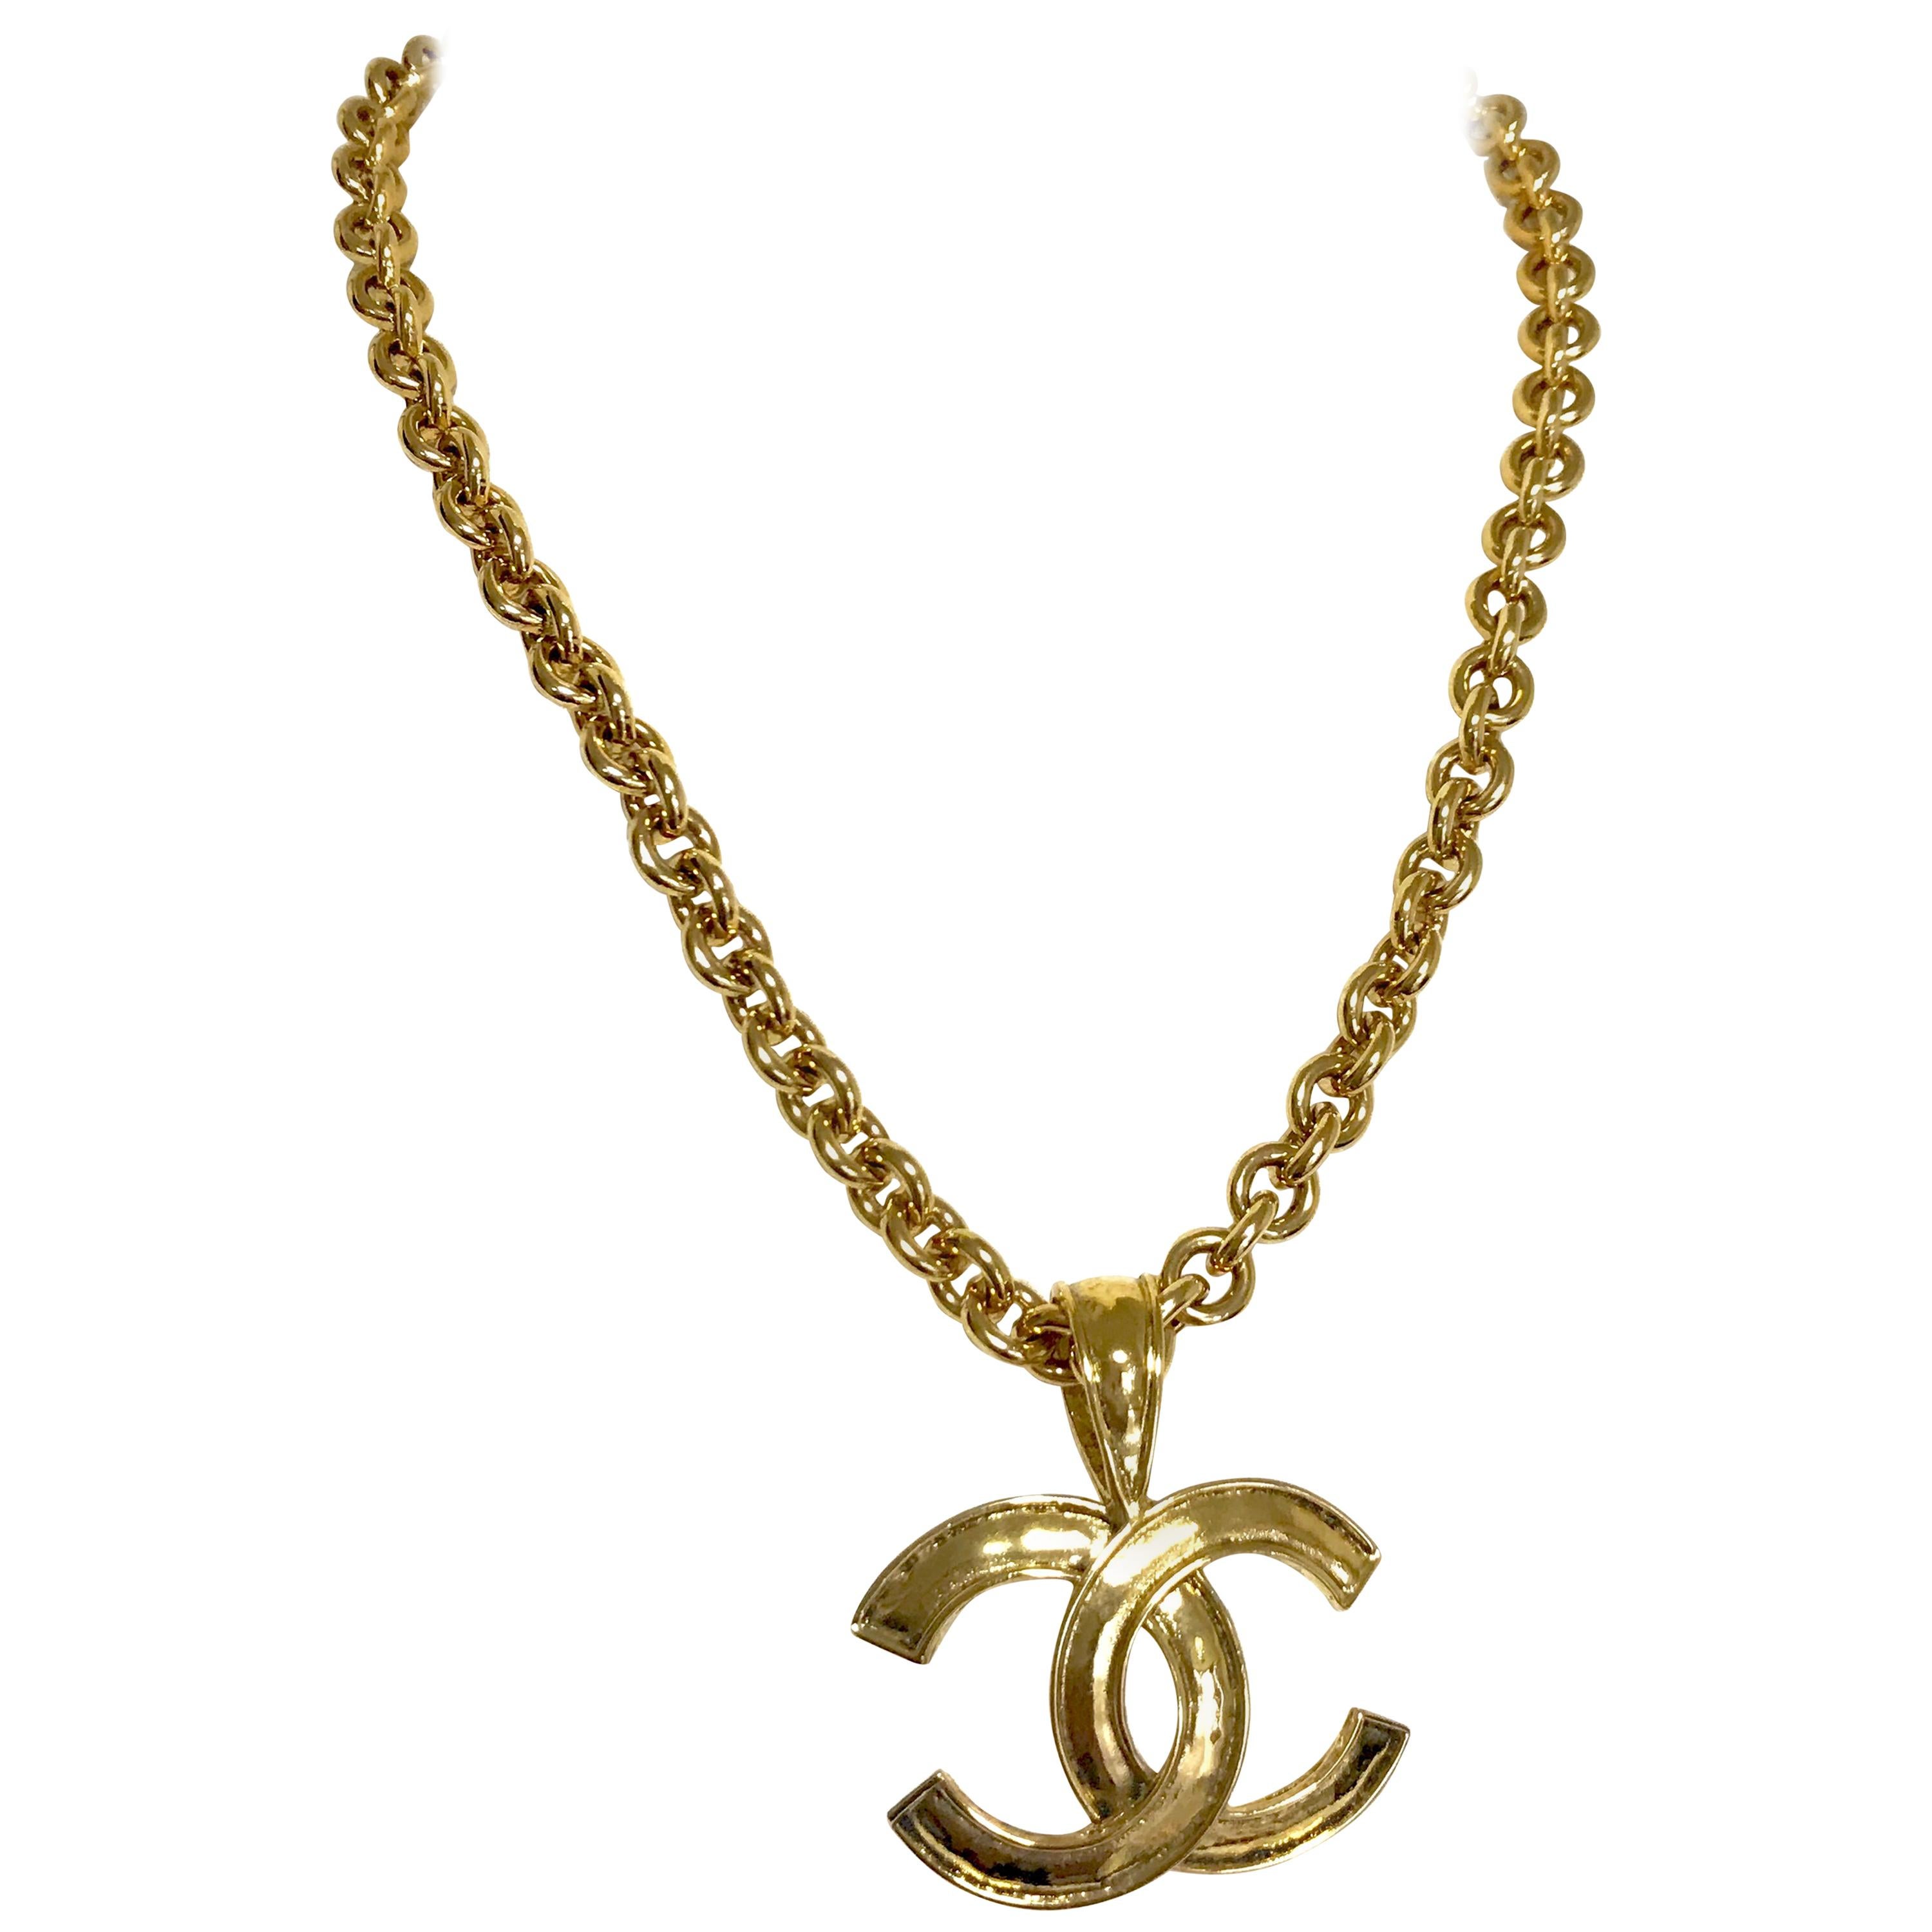 Vintage CHANEL golden chain necklace with large CC mark logo pendant top.  For Sale